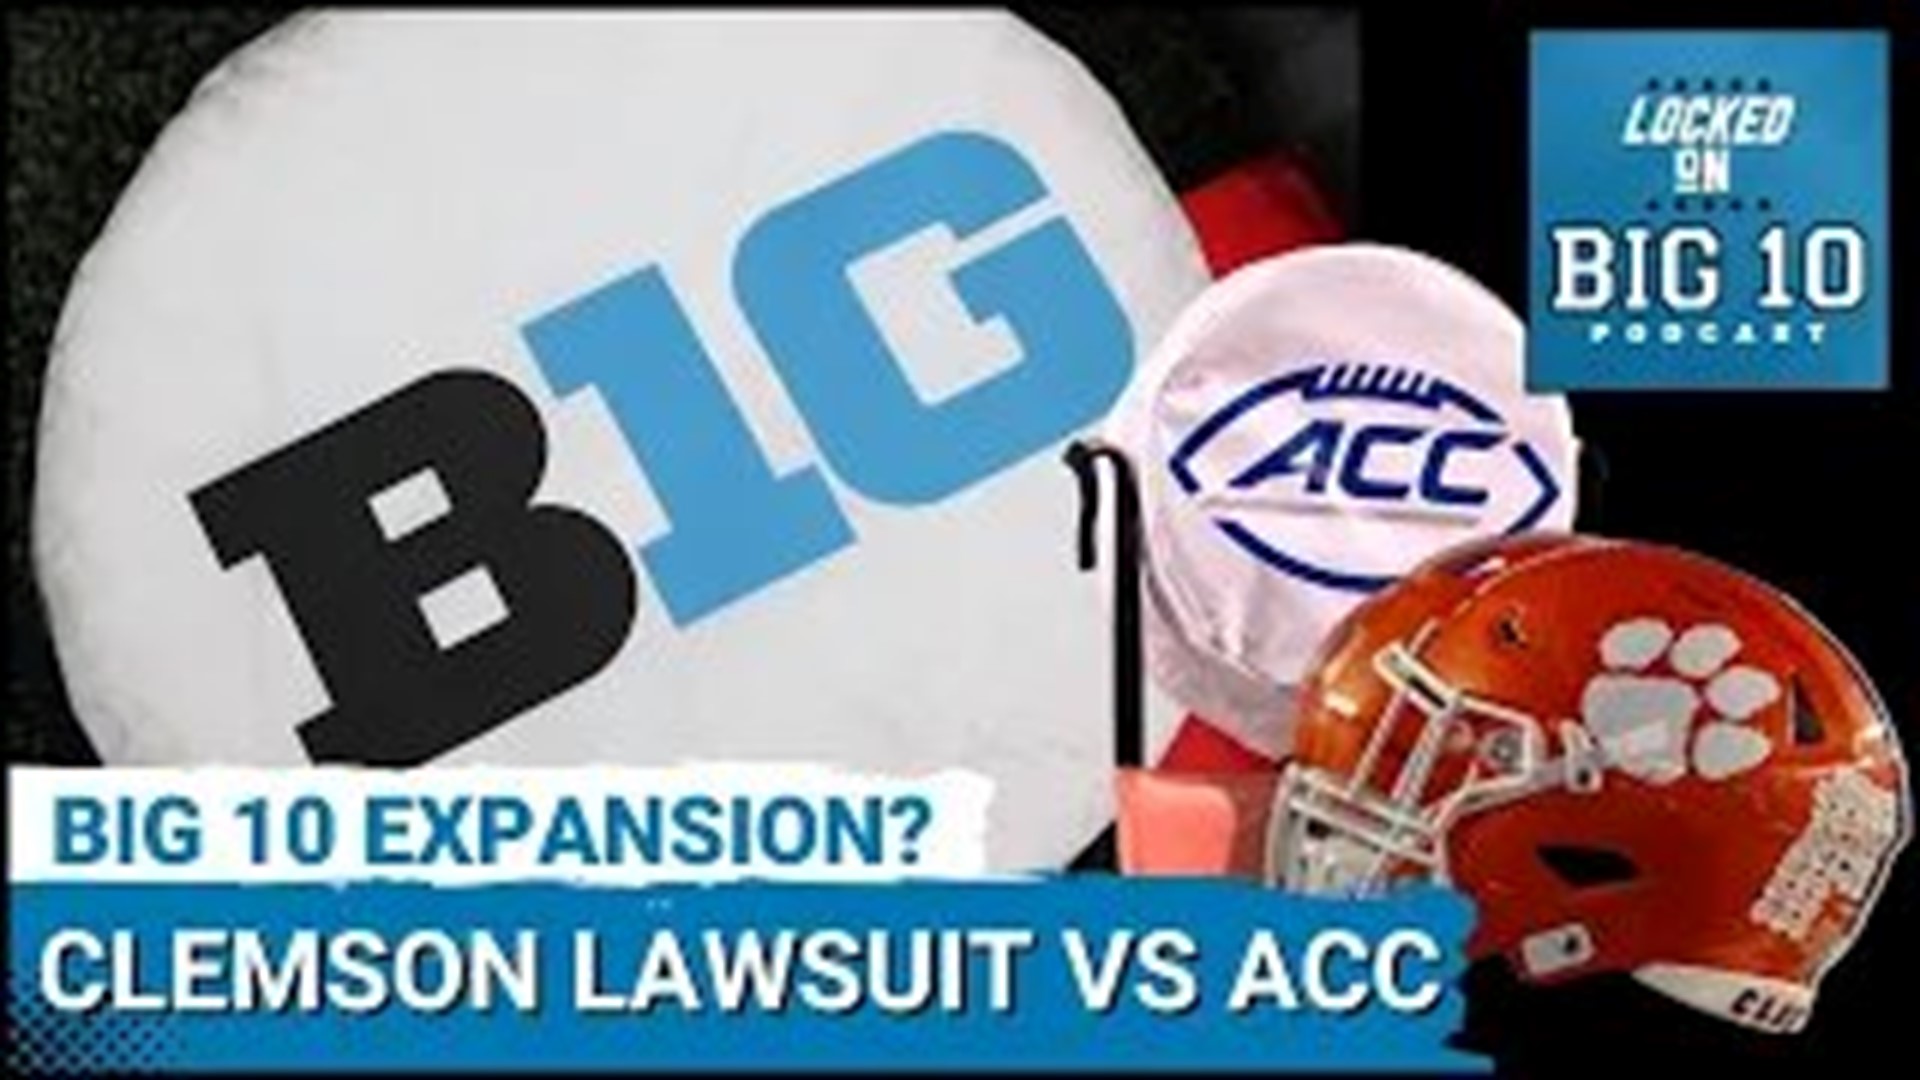 Clemson, like Florida State, is trying to sue its way out of the ACC.  Does this mean Big 10 expansion will be sooner than later?  We think so.